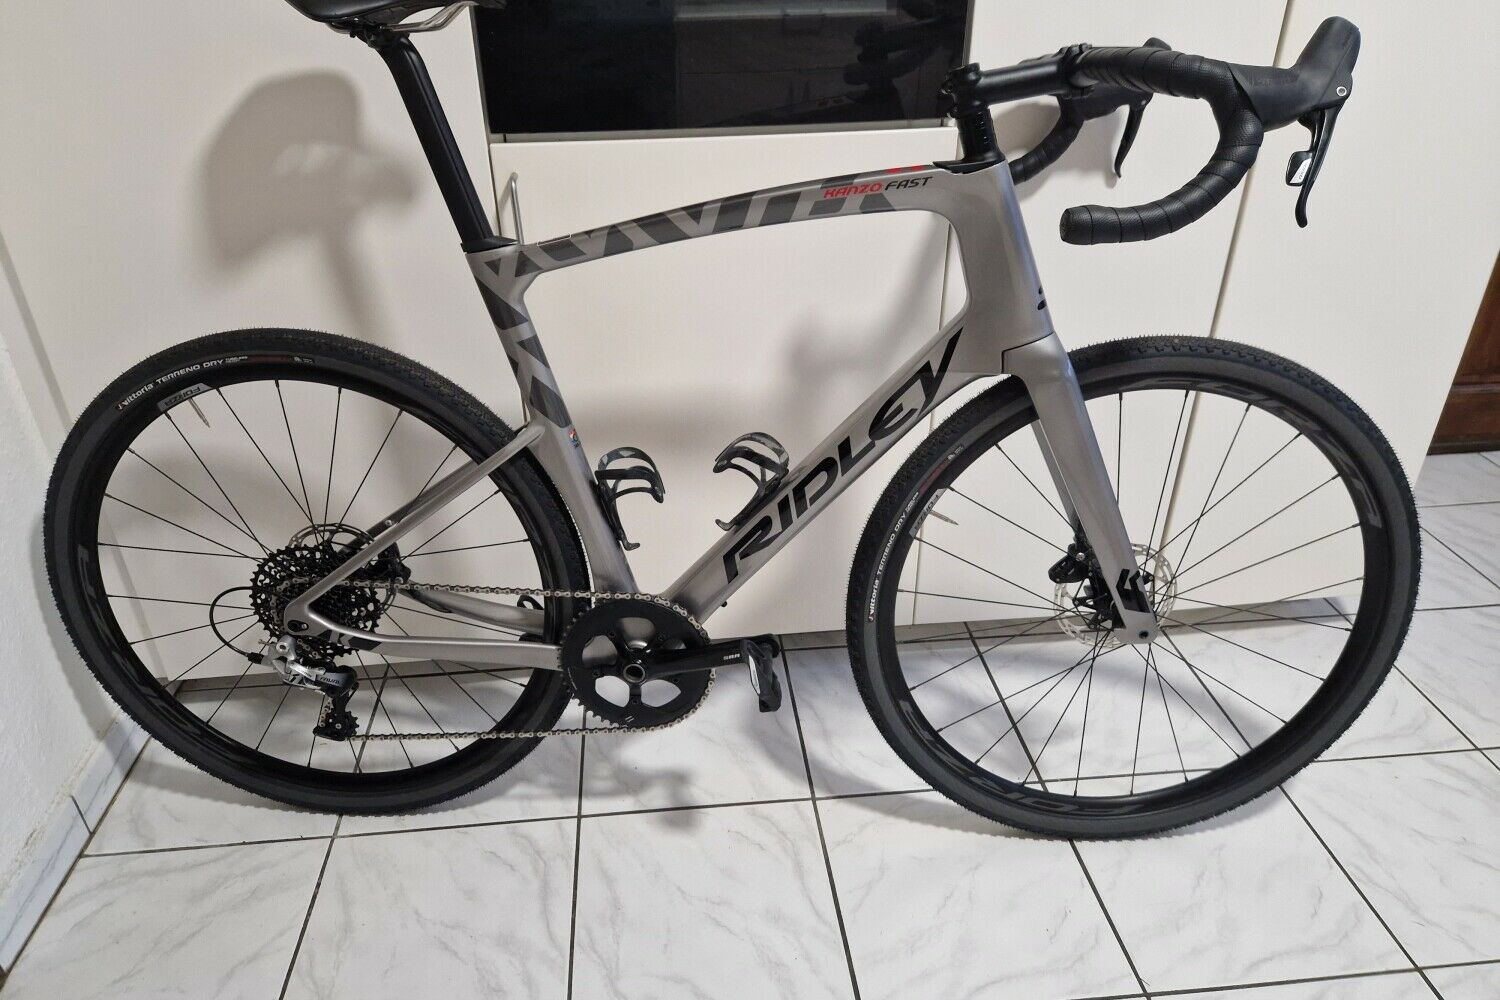 Ridley kanzo fast large nieuwstaat